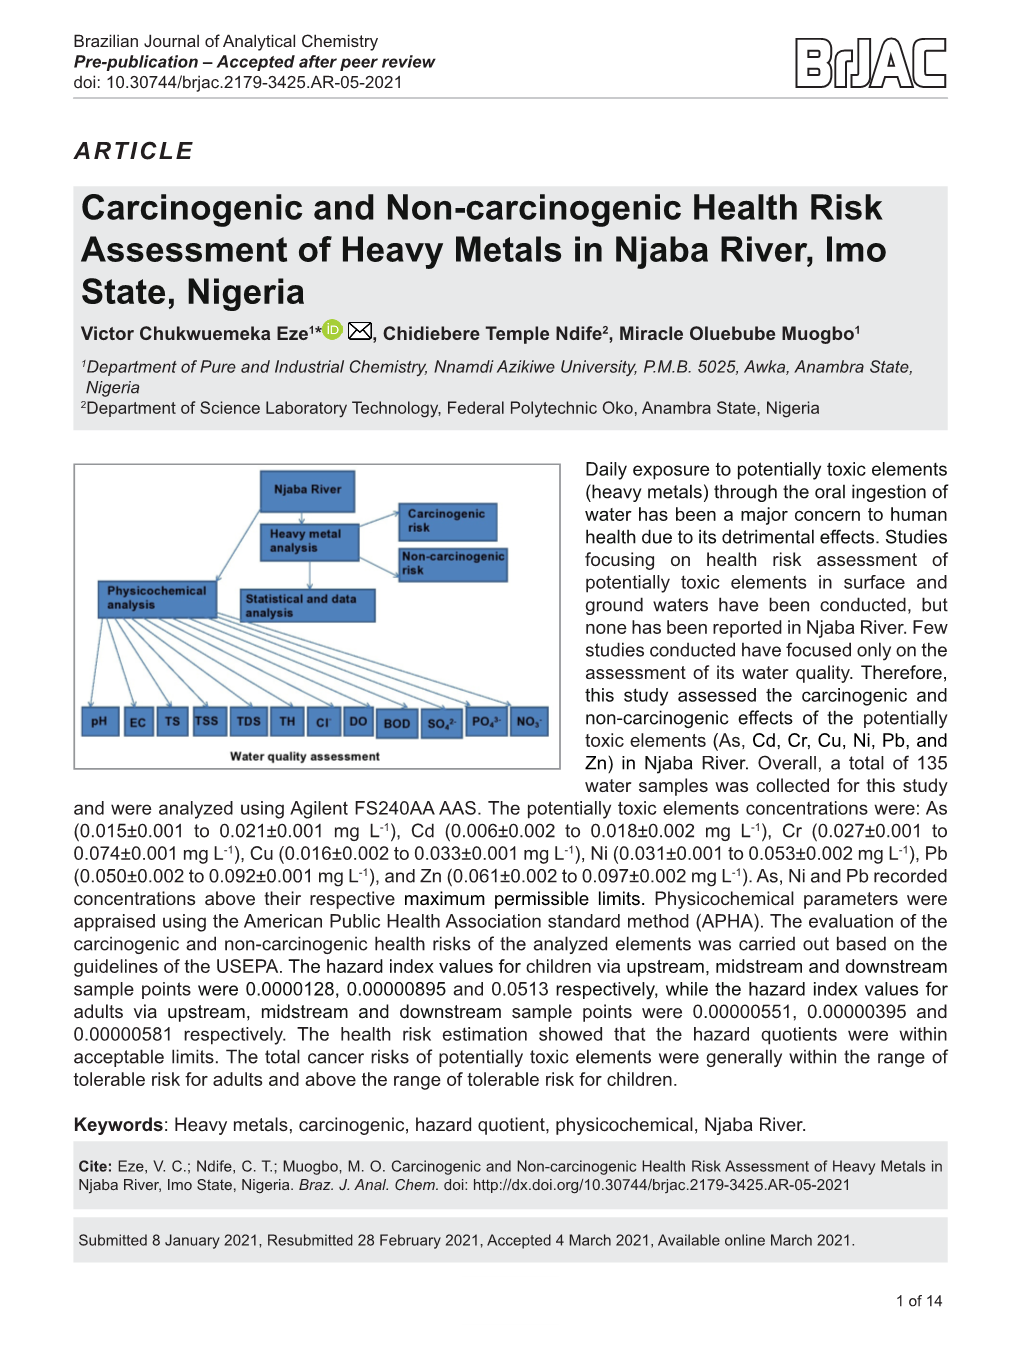 Carcinogenic and Non-Carcinogenic Health Risk Assessment of Heavy